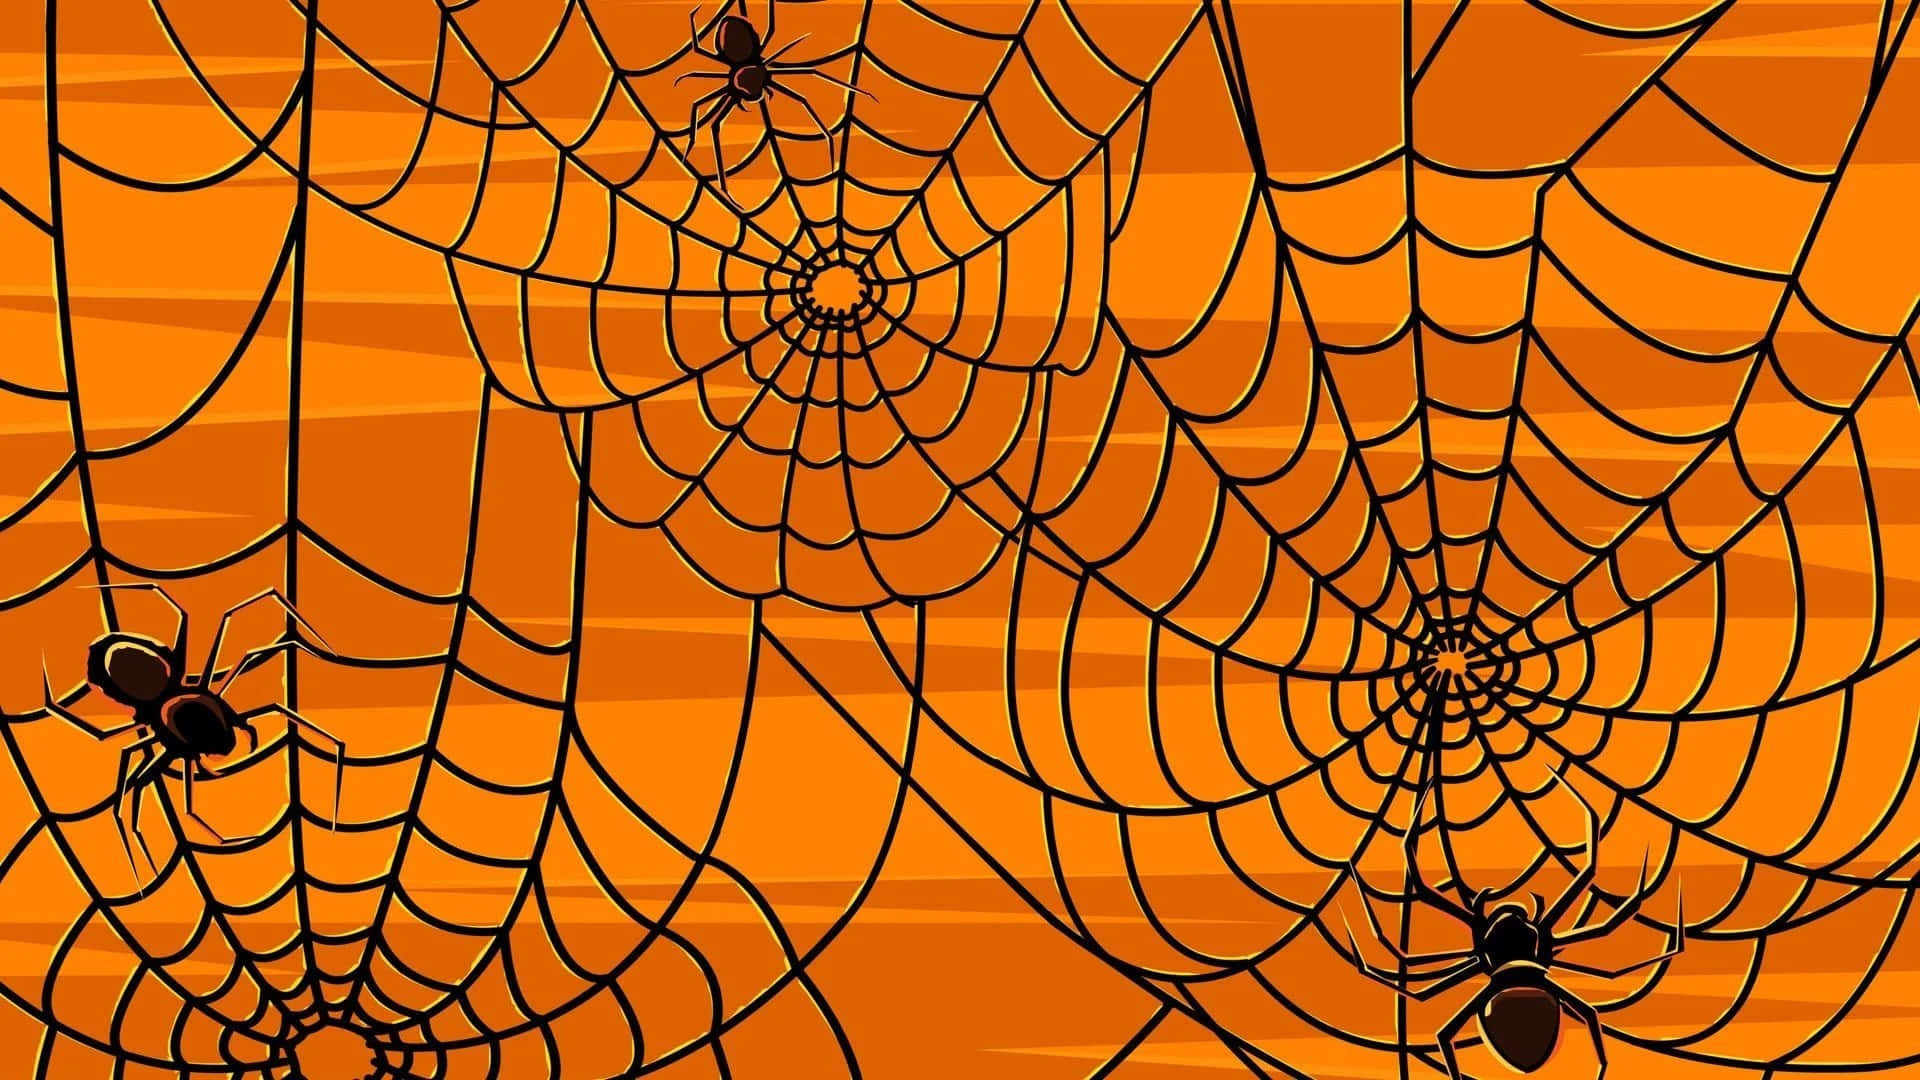 Download A Black And Orange Spider Web With Spiders | Wallpapers.com